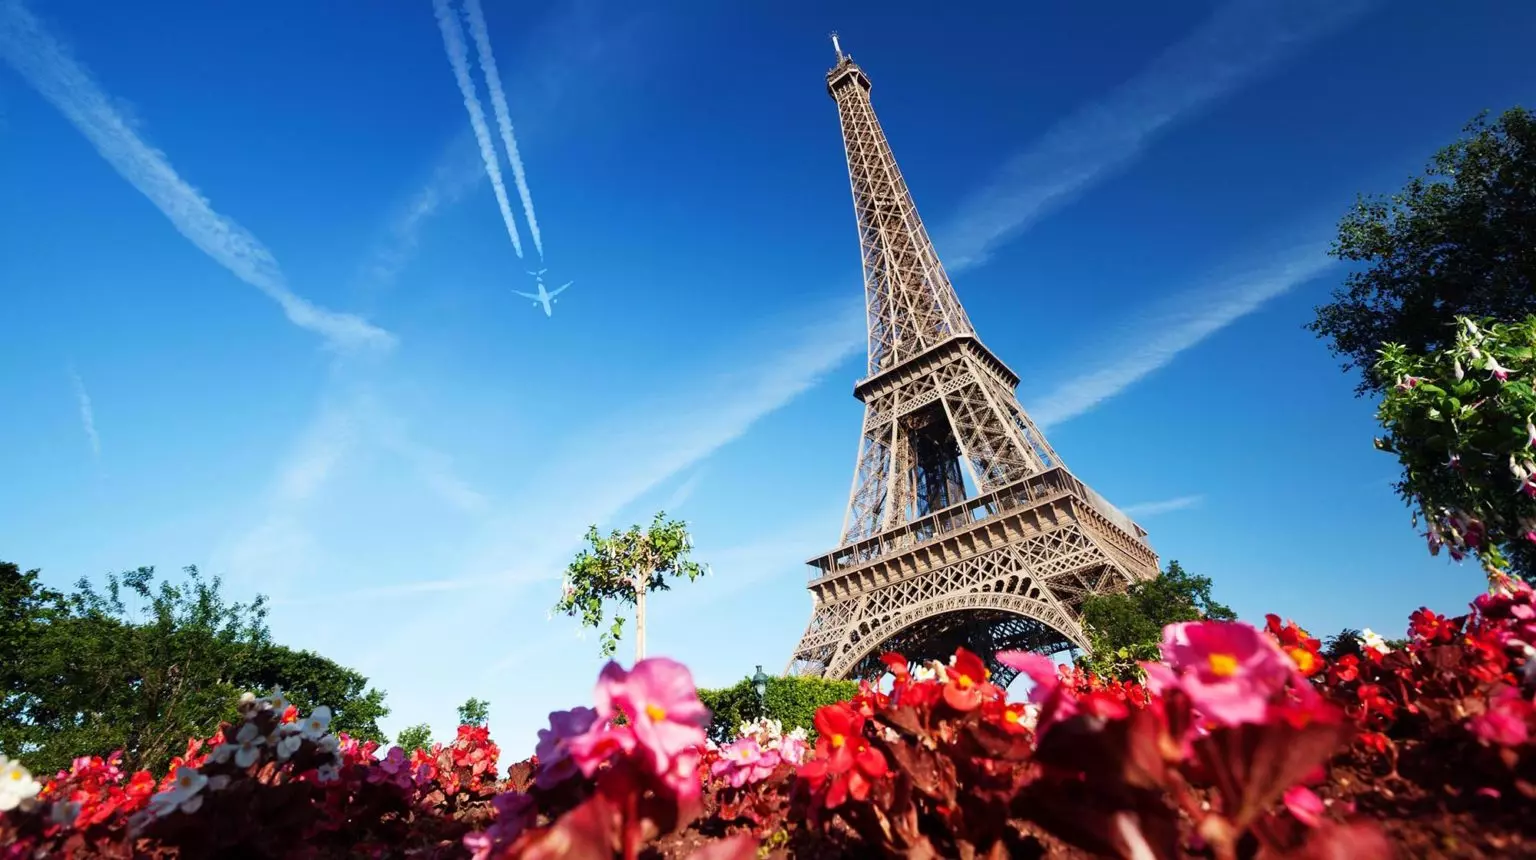 View from behind the flowers to the Eiffel Towers